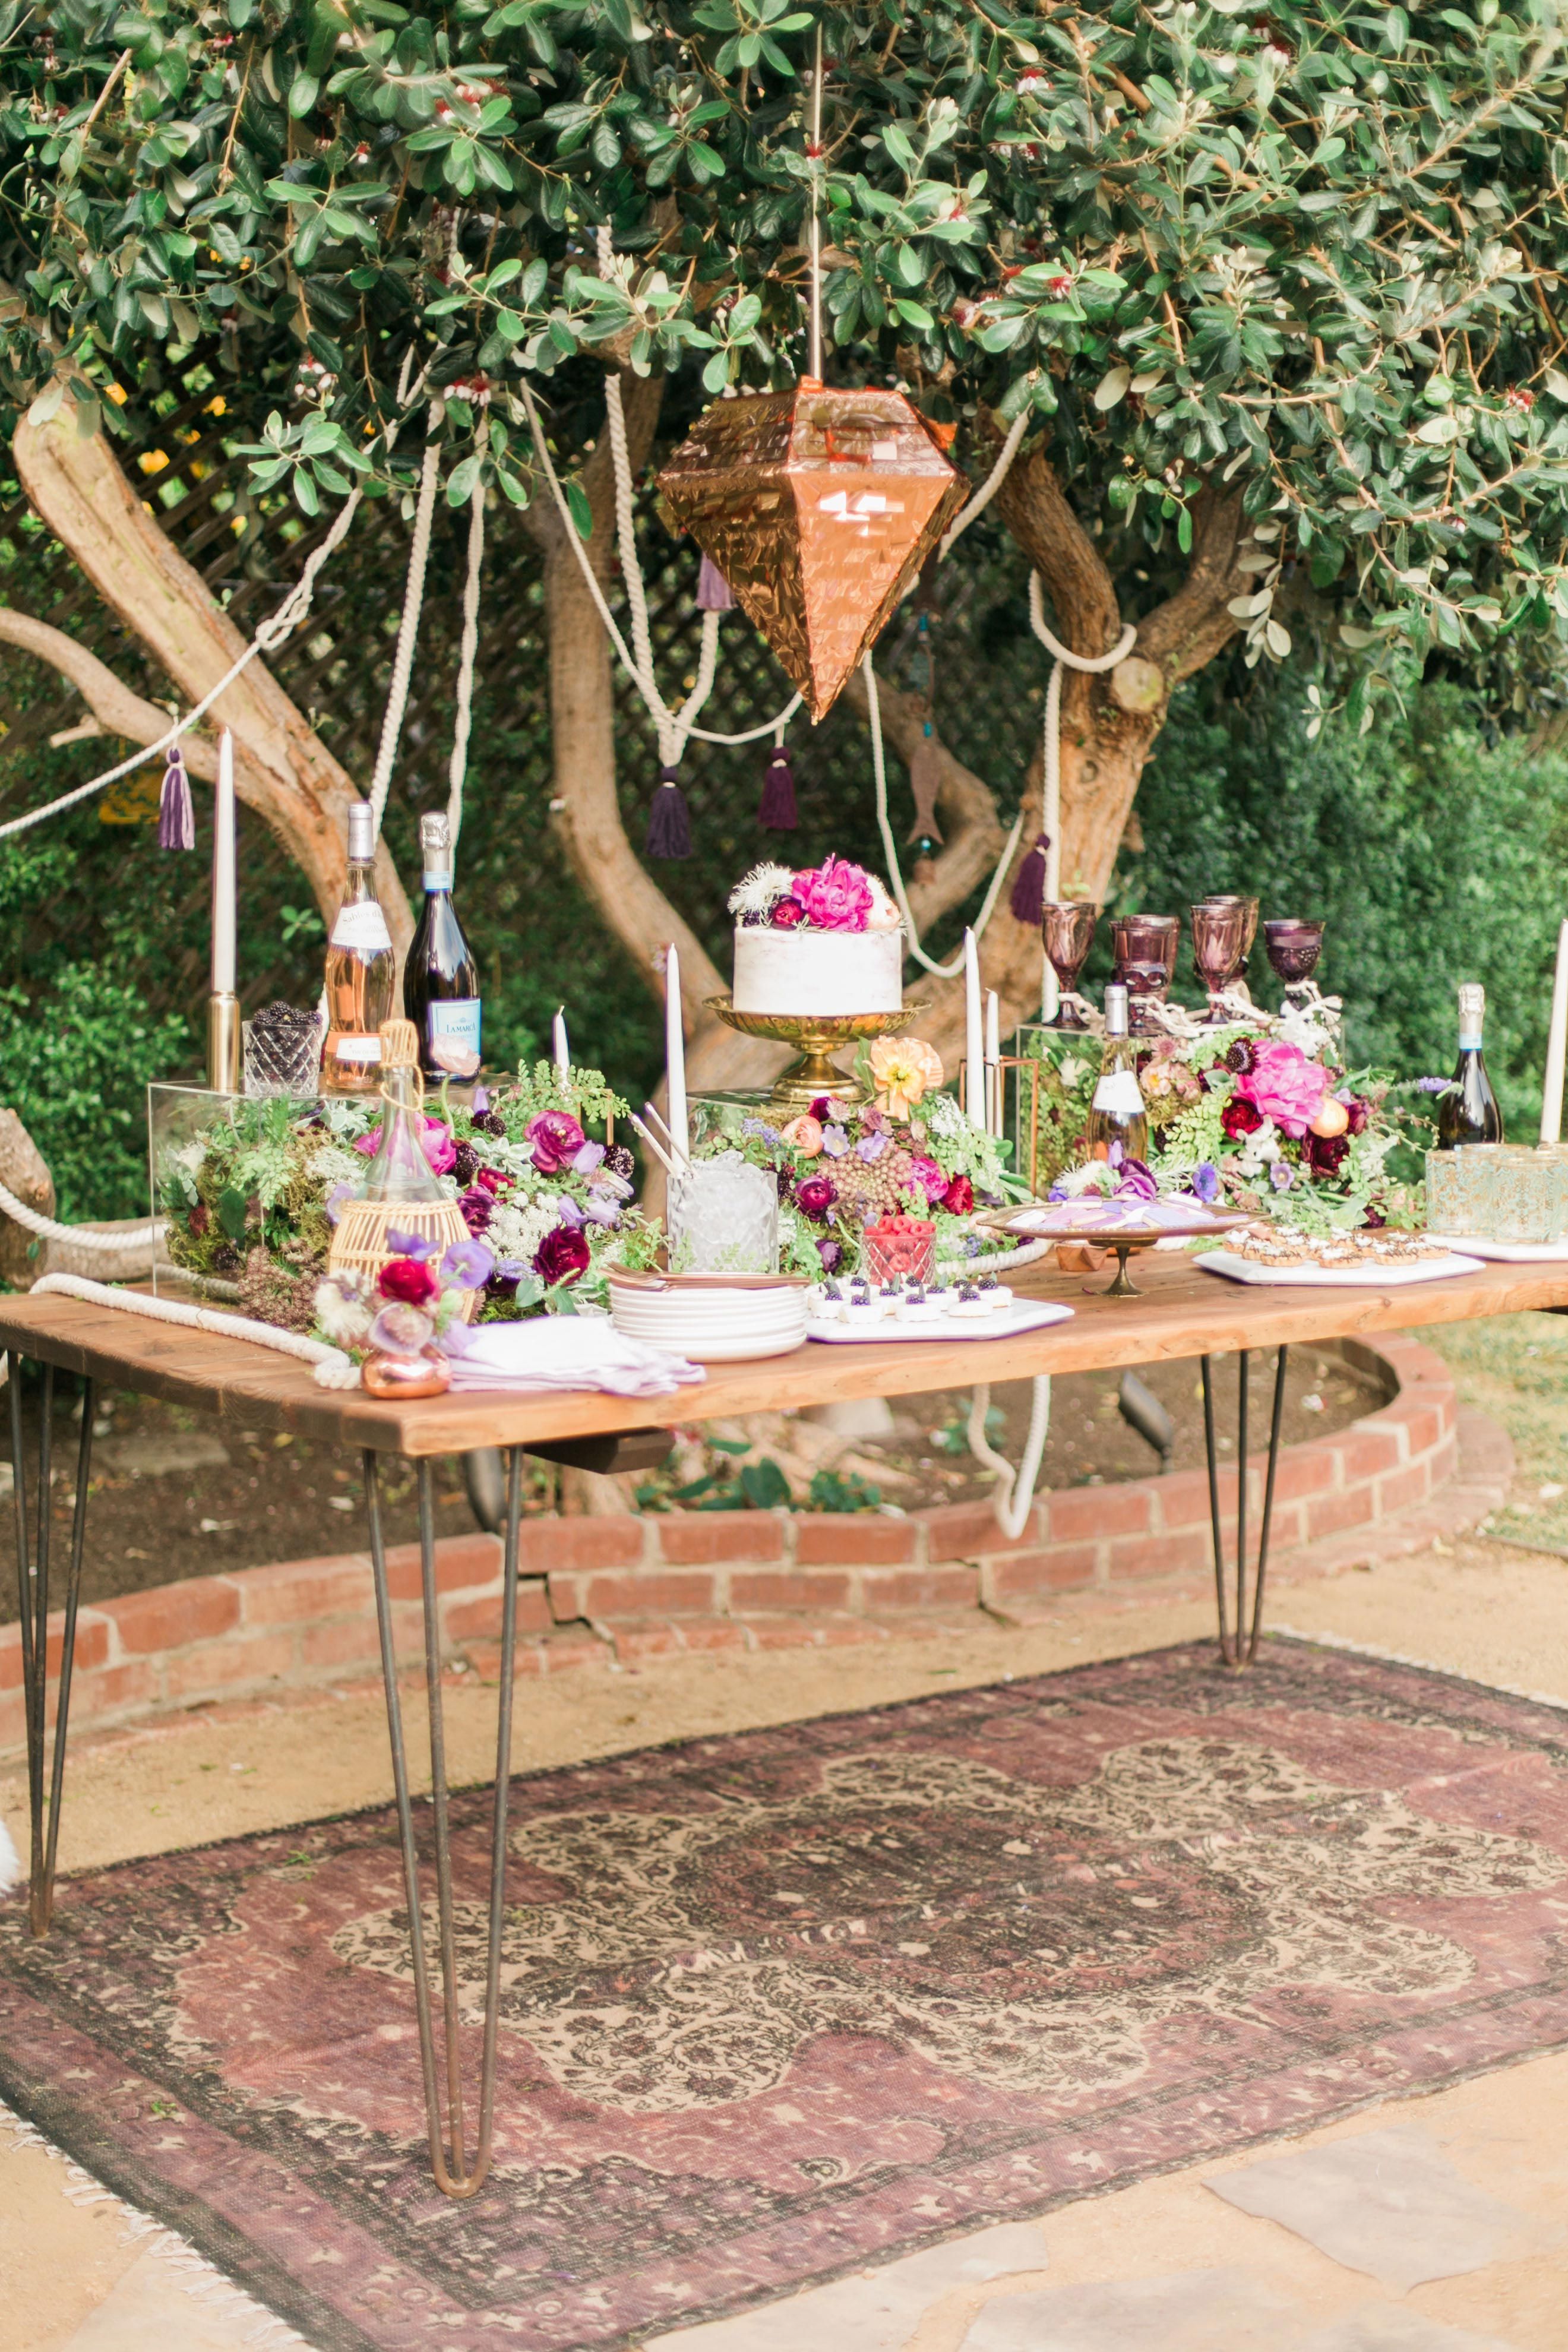 You'll Want to Pin Every Detail of This Boho-Chic Bachelorette Party - You'll Want to Pin Every Detail of This Boho-Chic Bachelorette Party -   17 style Chic party ideas